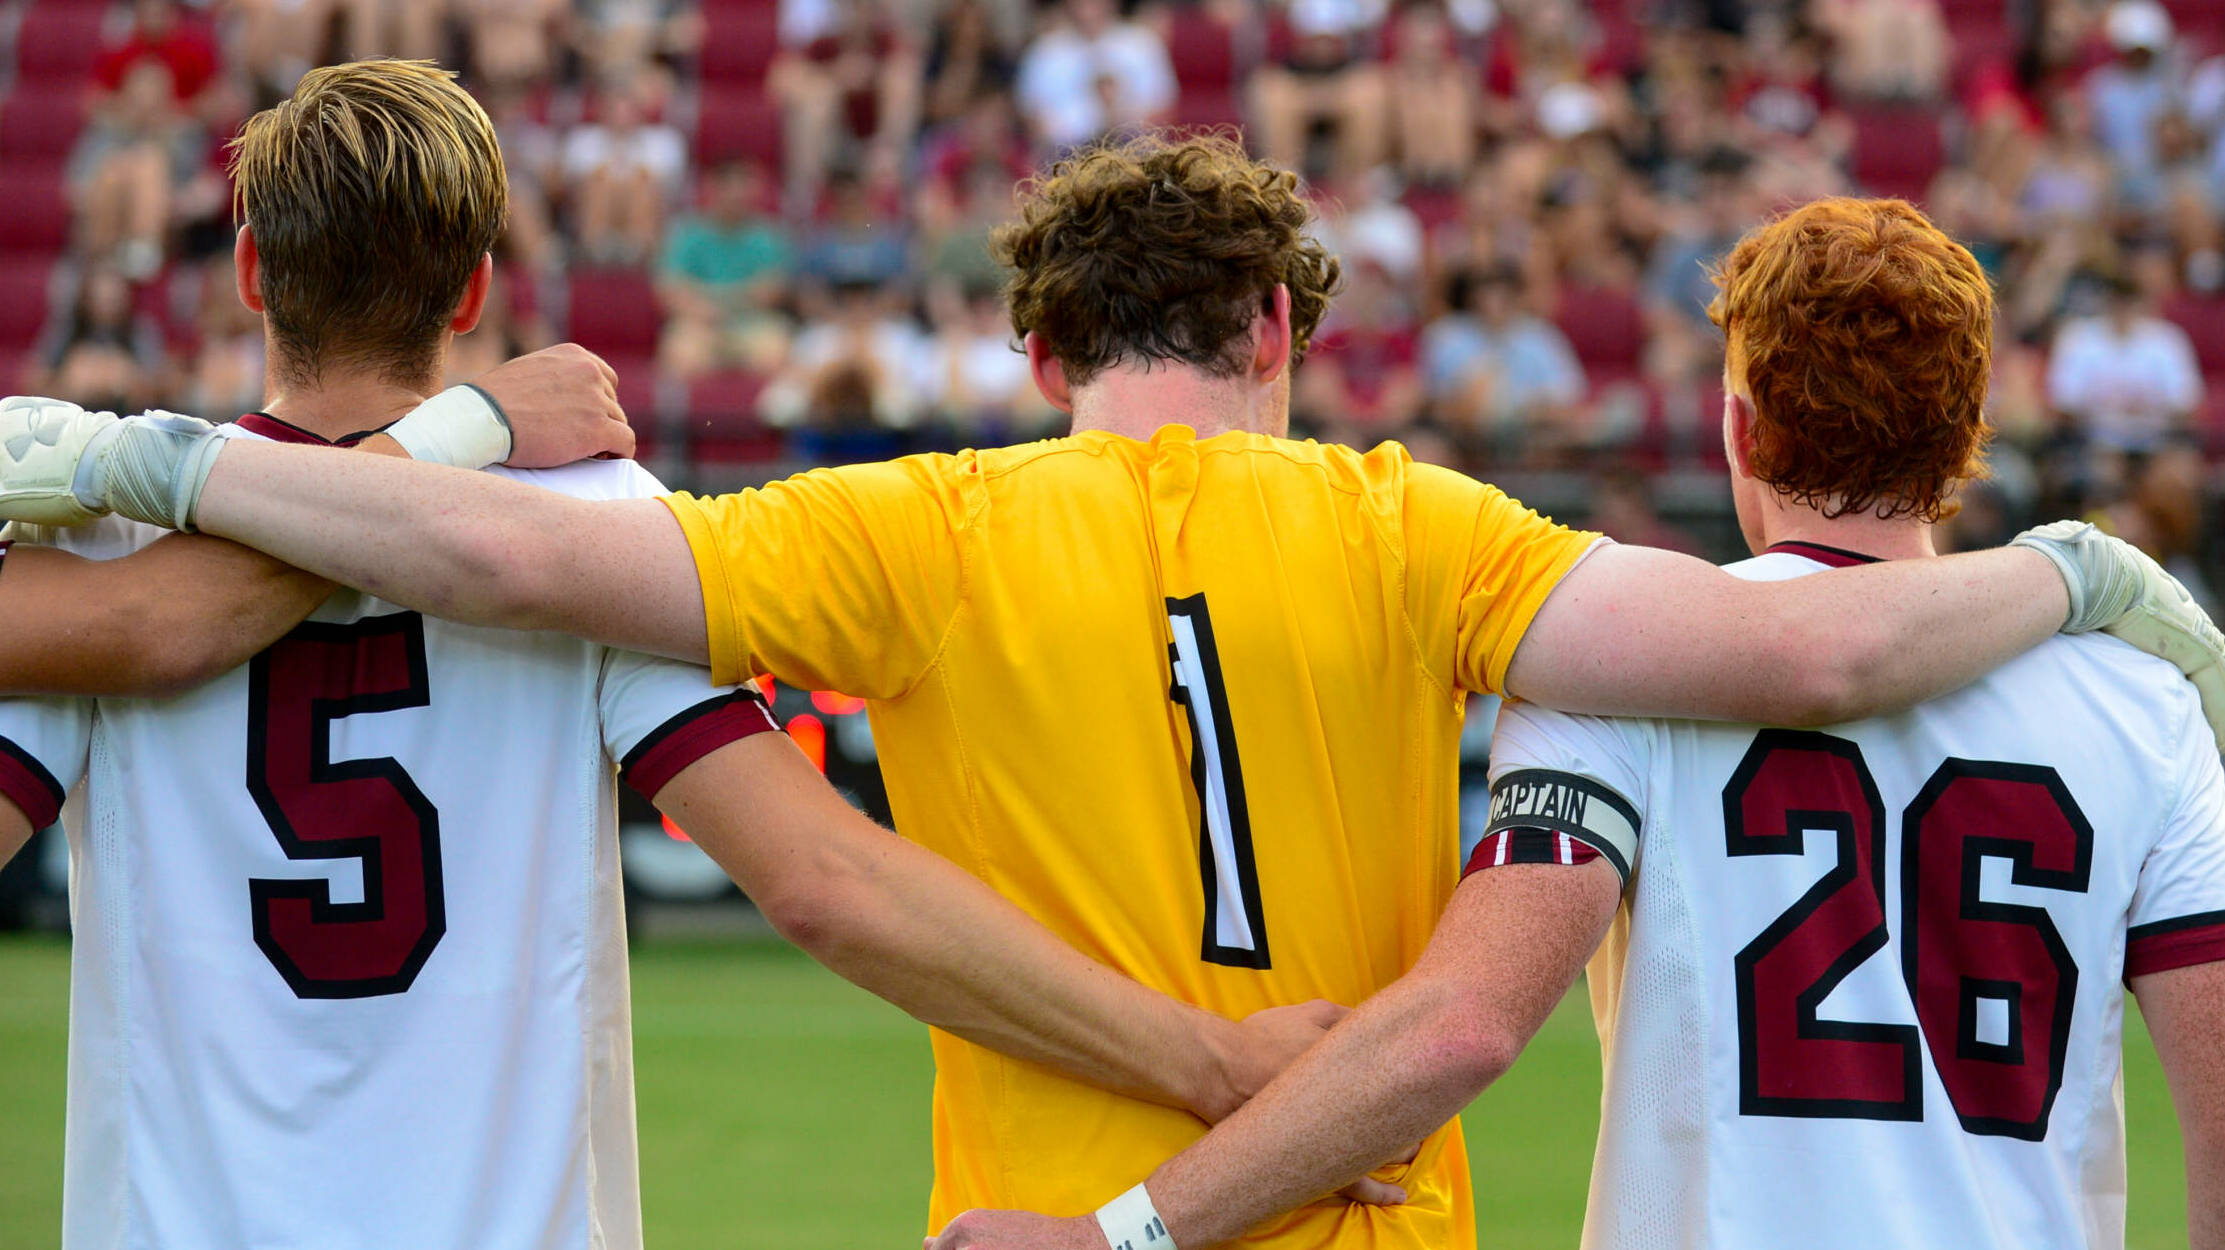 Men’s Soccer Wraps Up Homestand Tuesday Night vs Winthrop